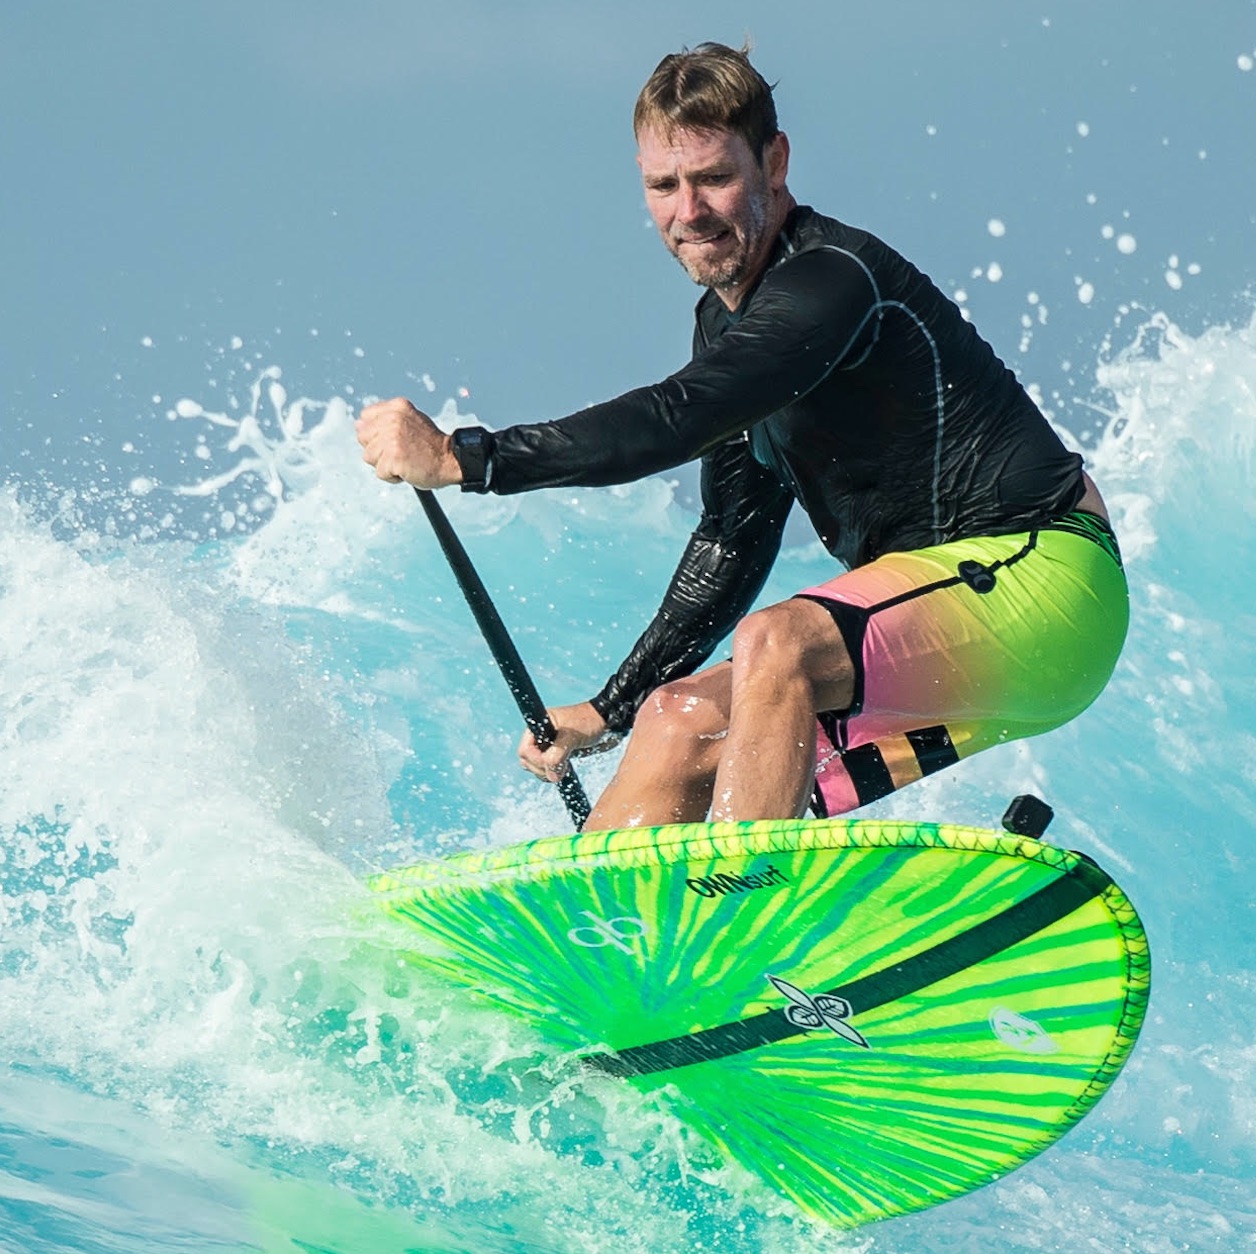 Erik Logan - The Consigliere of Paddle Surfing